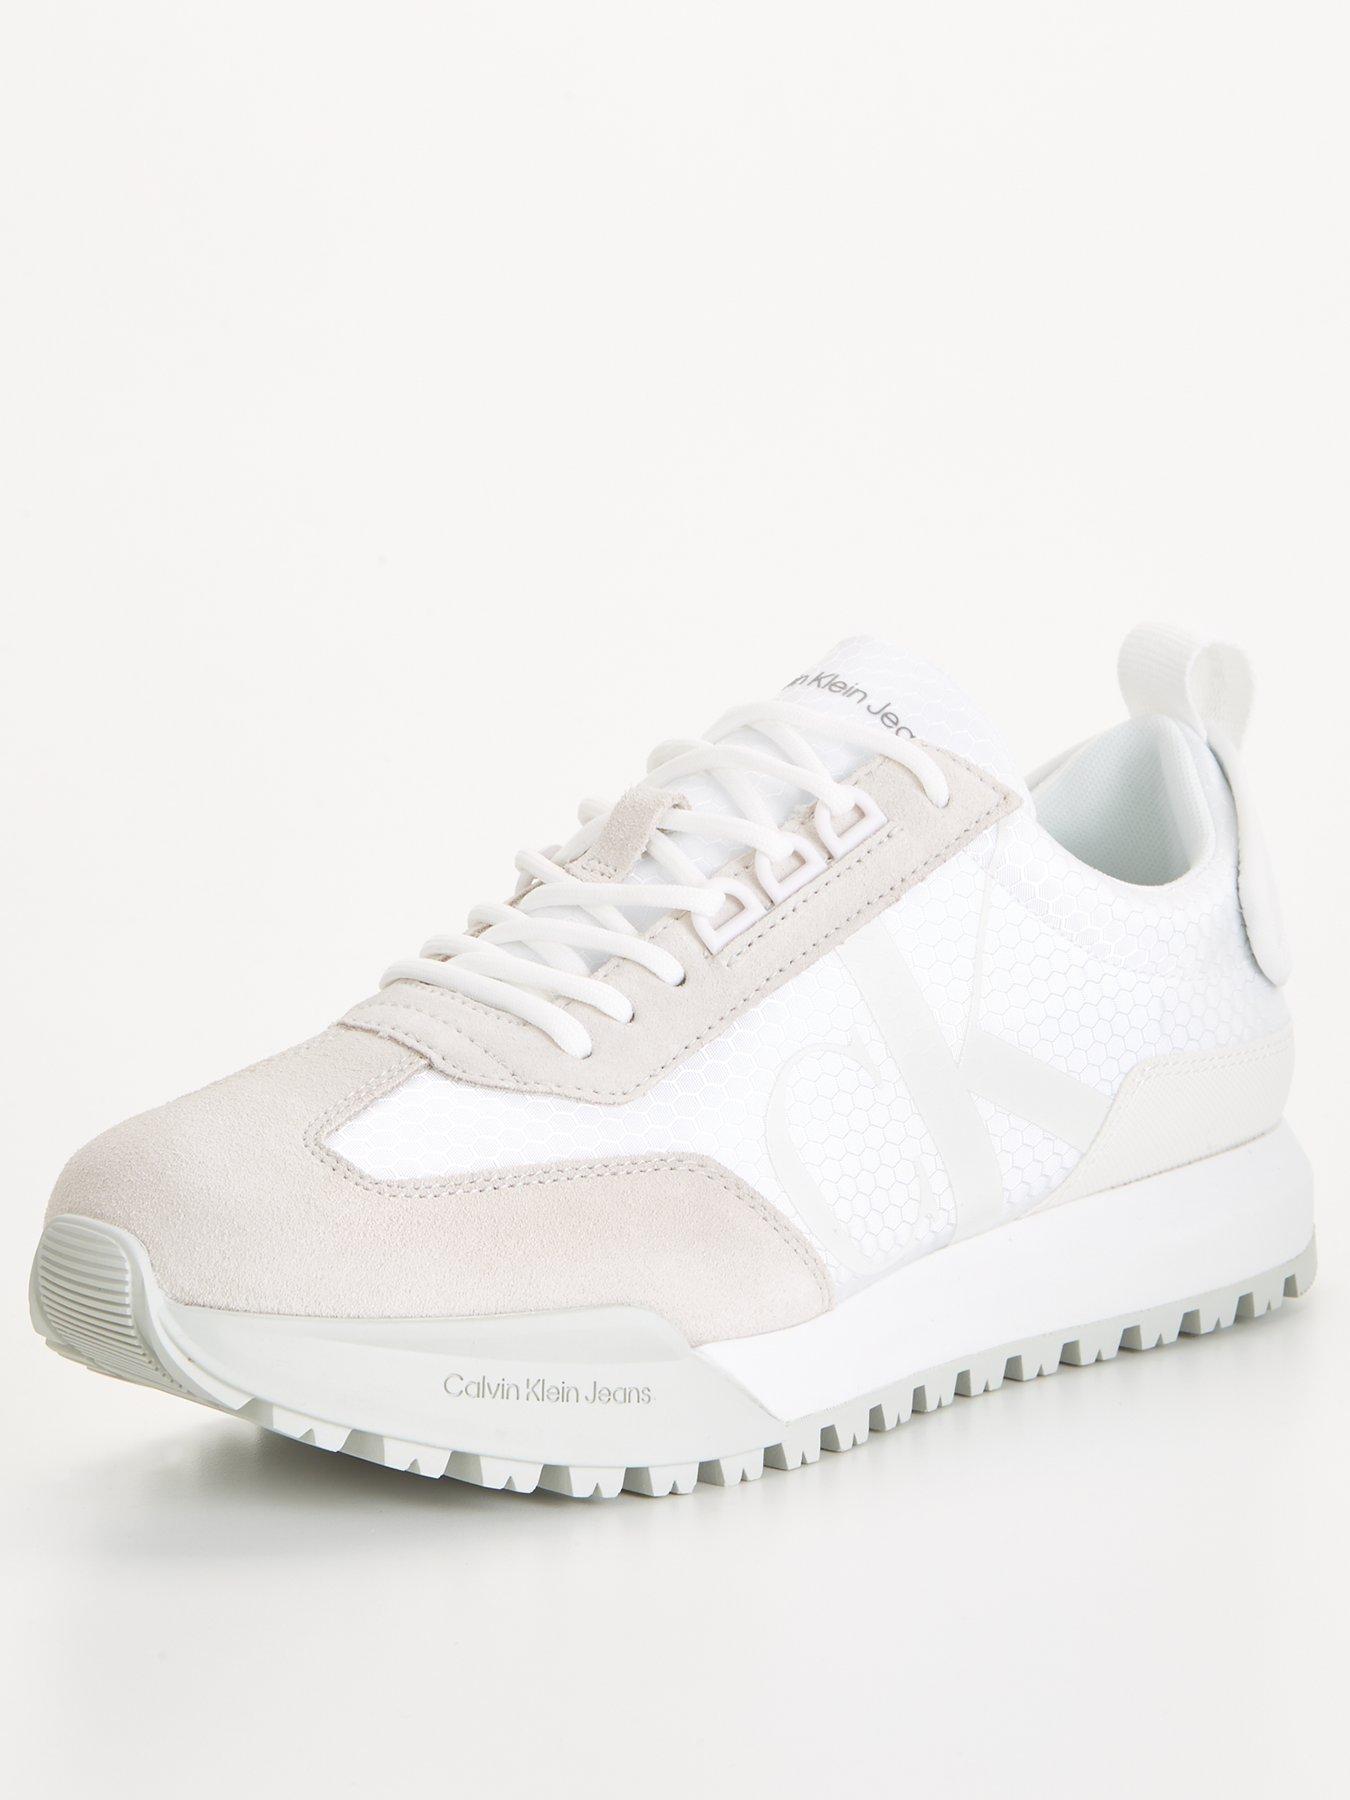 Calvin Klein Jeans Toothy Runner Trainers - White | very.co.uk